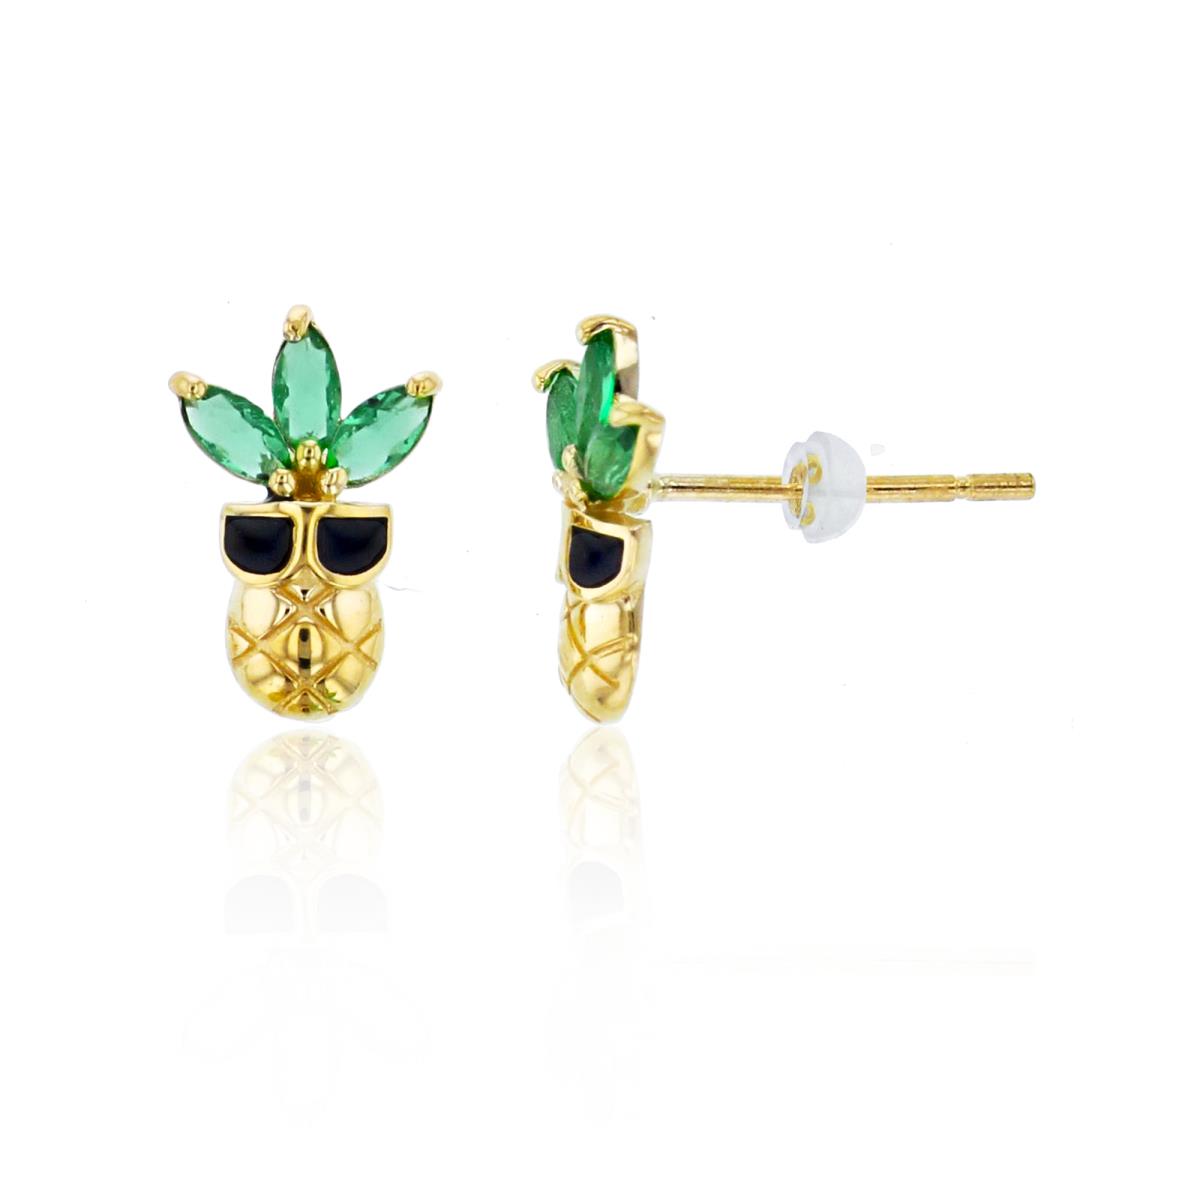 14K Yellow Gold Pineapple with Green CZ Leaves & Black Enamel Sunglasses 9x6mm Studs with Silicone Backs